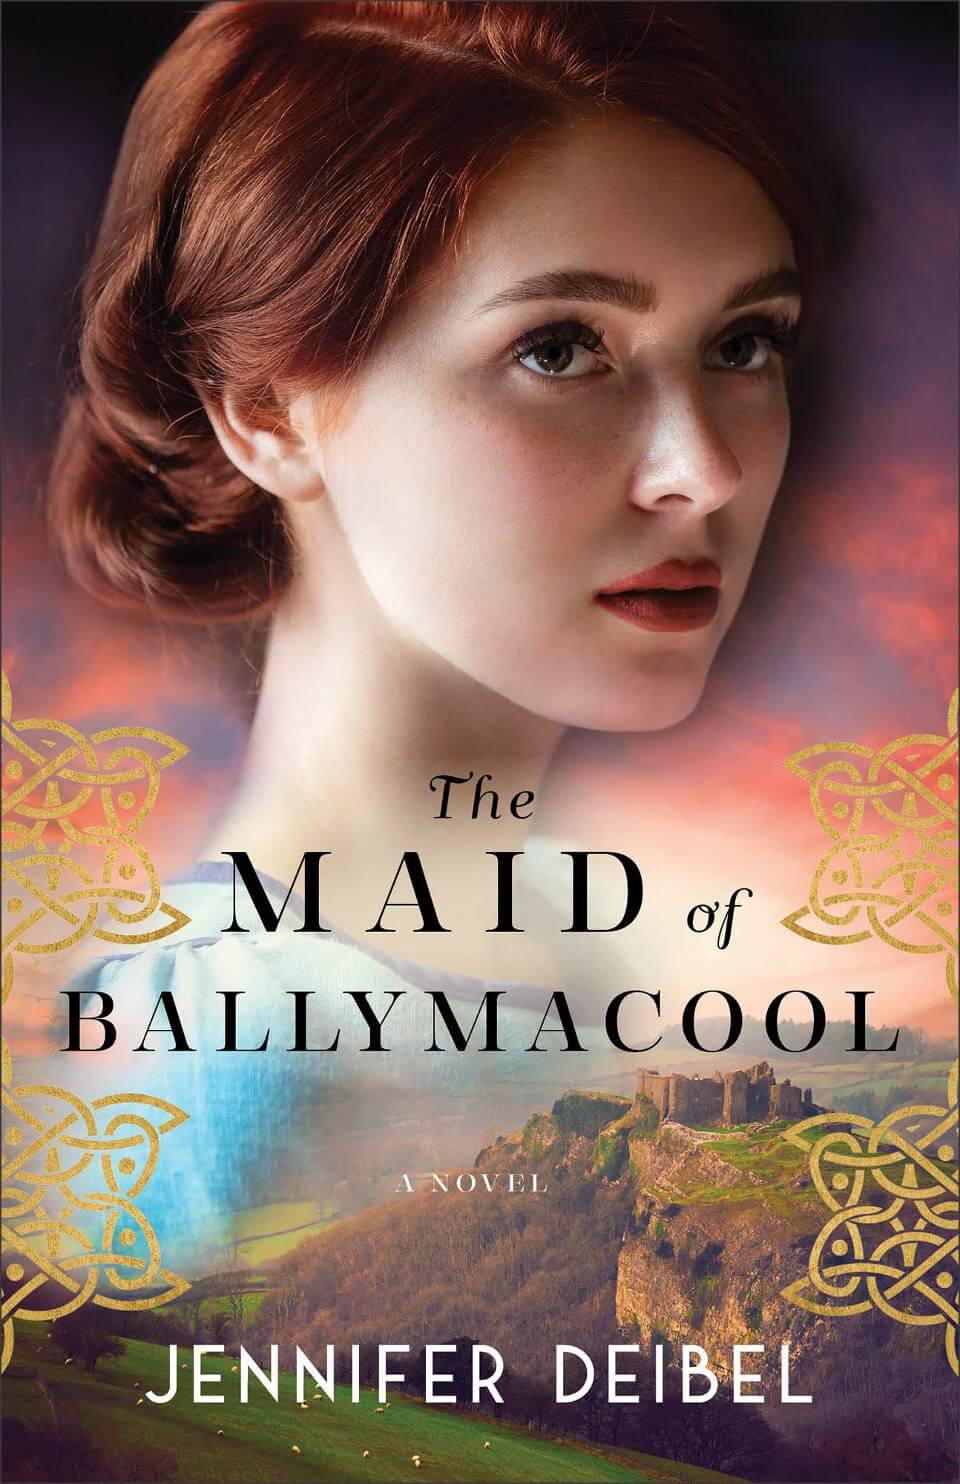 The Maid of Ballymacool 2023 book cover